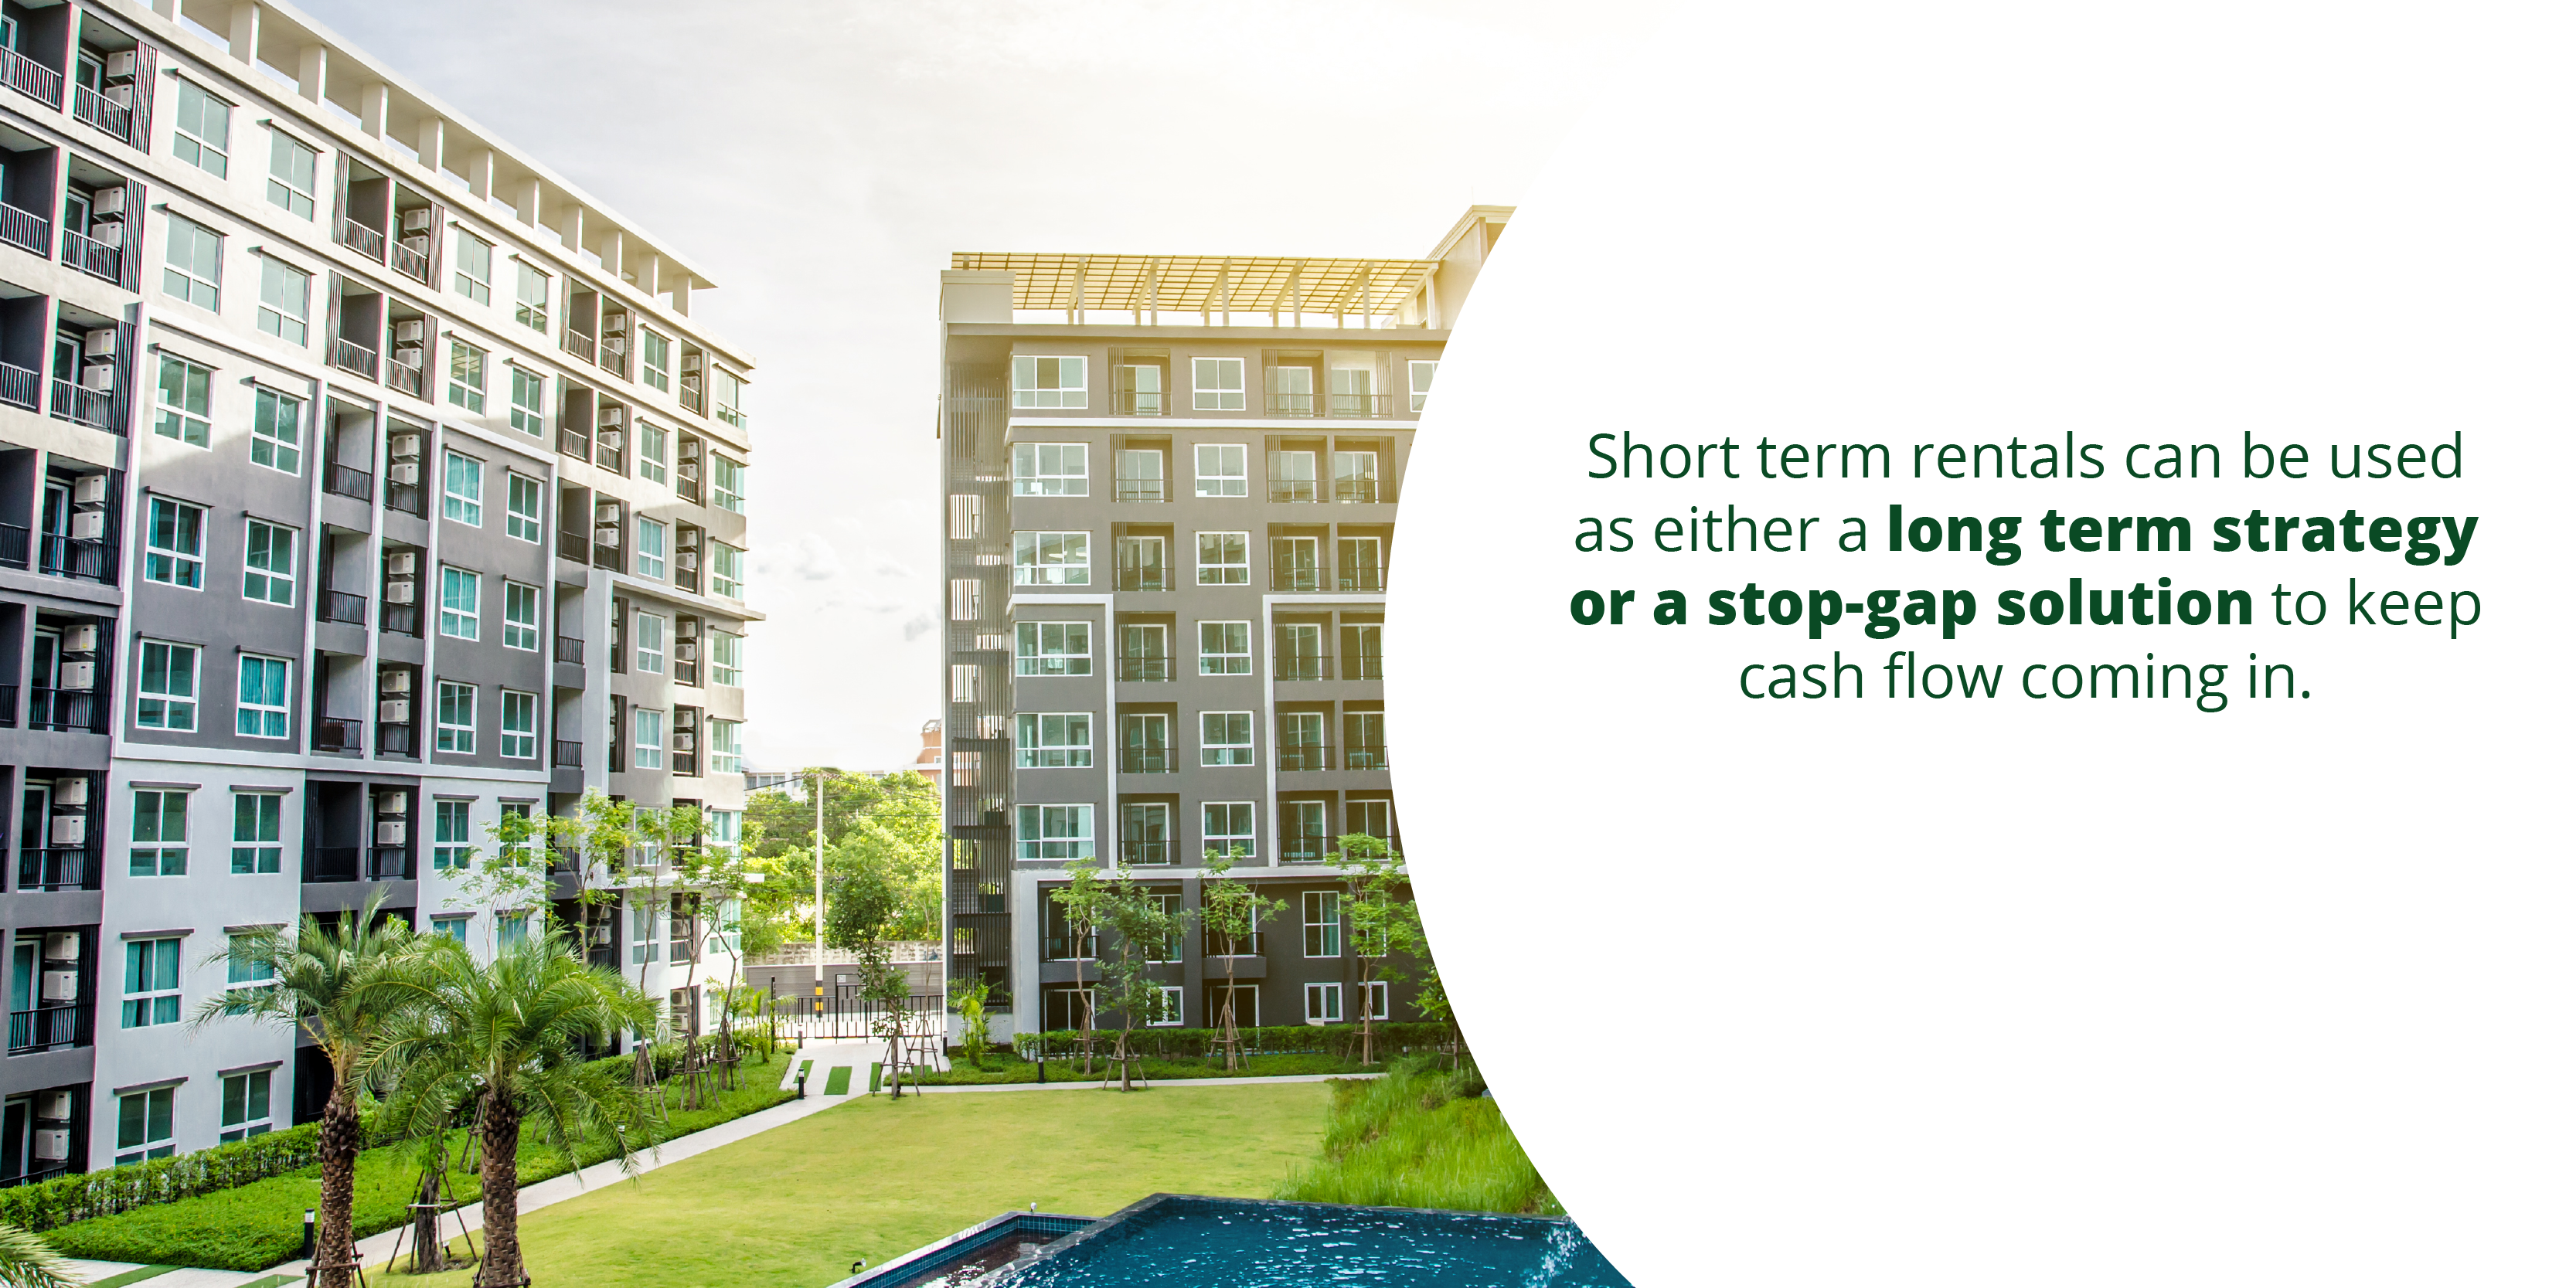 Short_term_rentals_can_be_long_term_strategy_or_stop_gap_solution_3